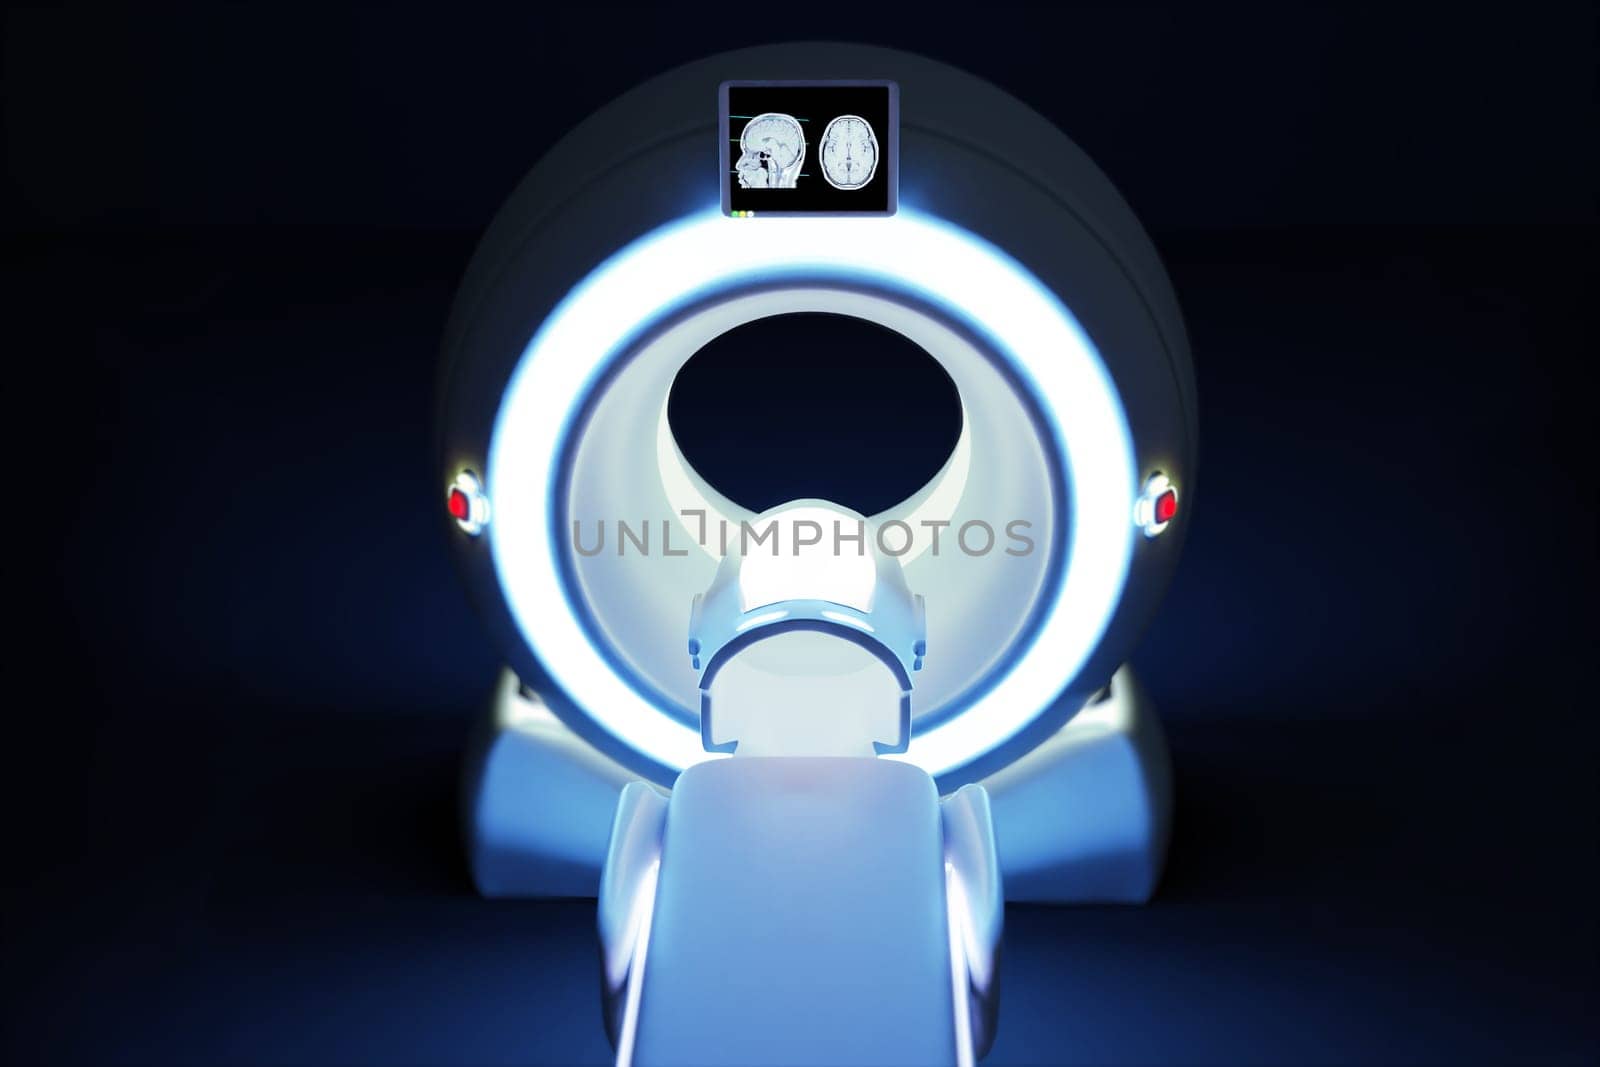 Fronr view of MRI SCANNER - Magnetic resonance imaging  device in Hospital 3D rendering  . Medical Equipment and Health Care background. by samunella